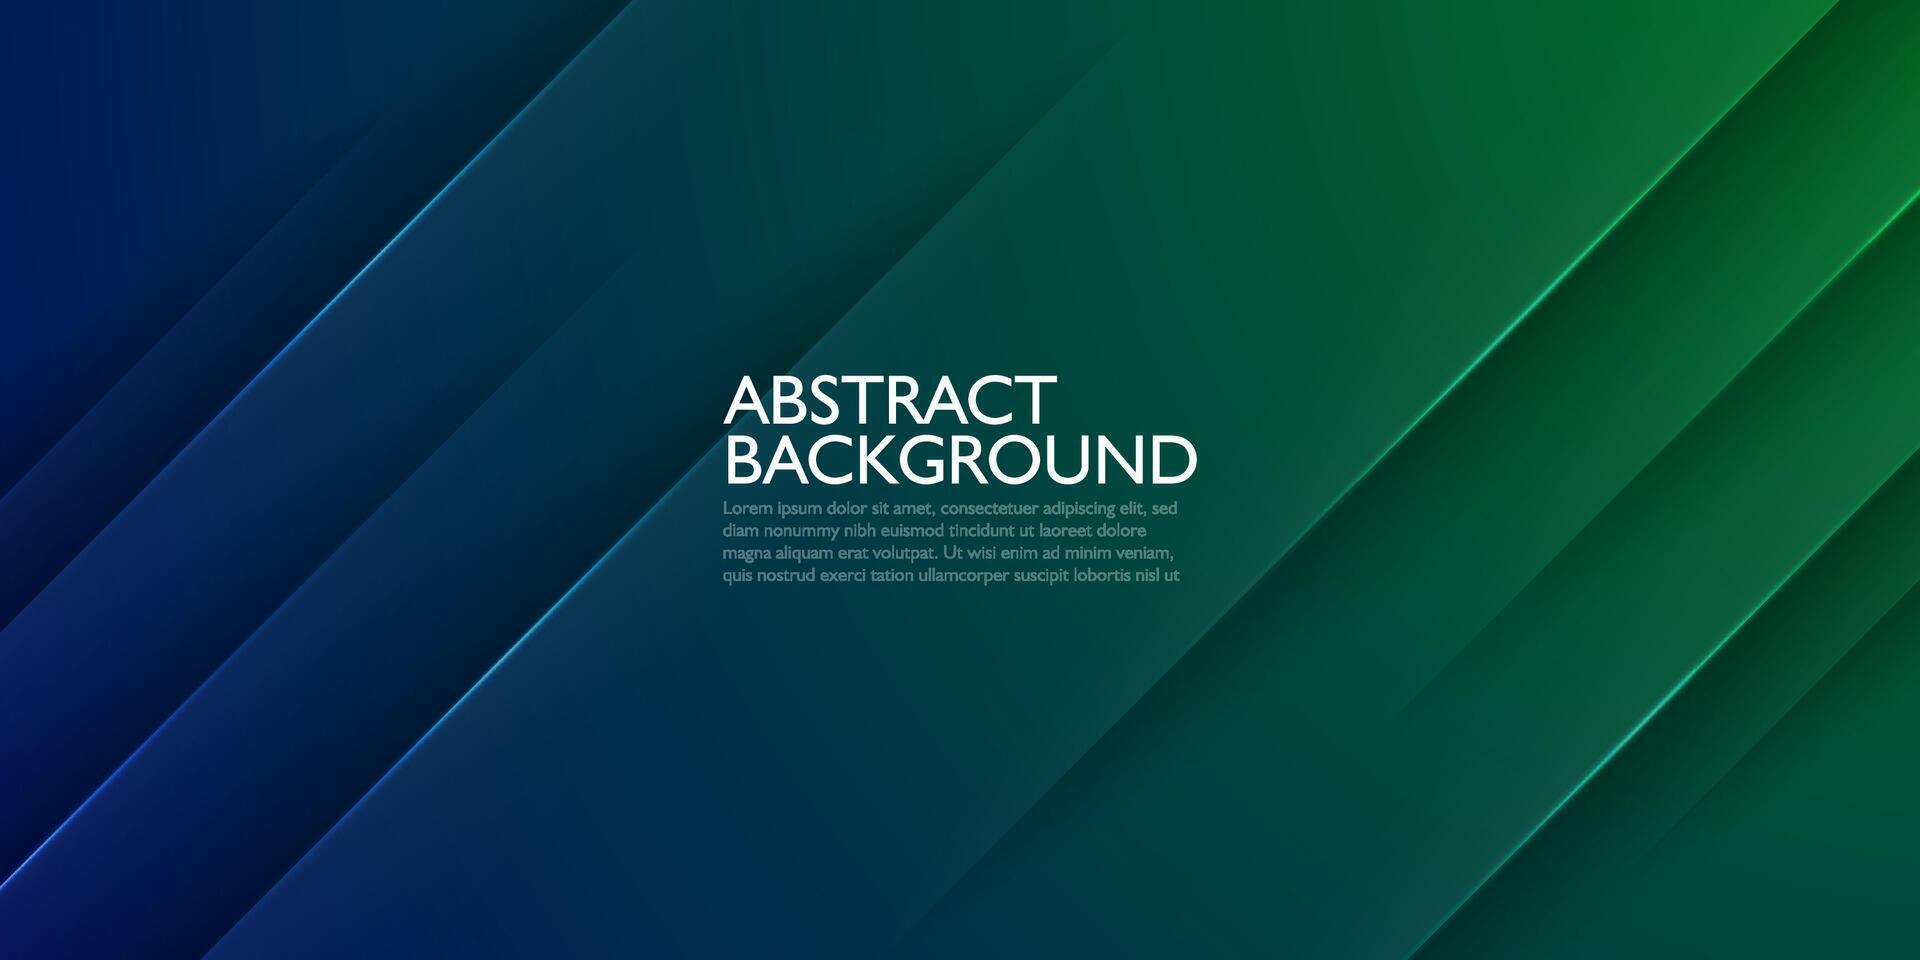 Abstract dark blue and green overlap background template with shadow papercut pattern. Dark background with shadow and lines design. Eps10 vector